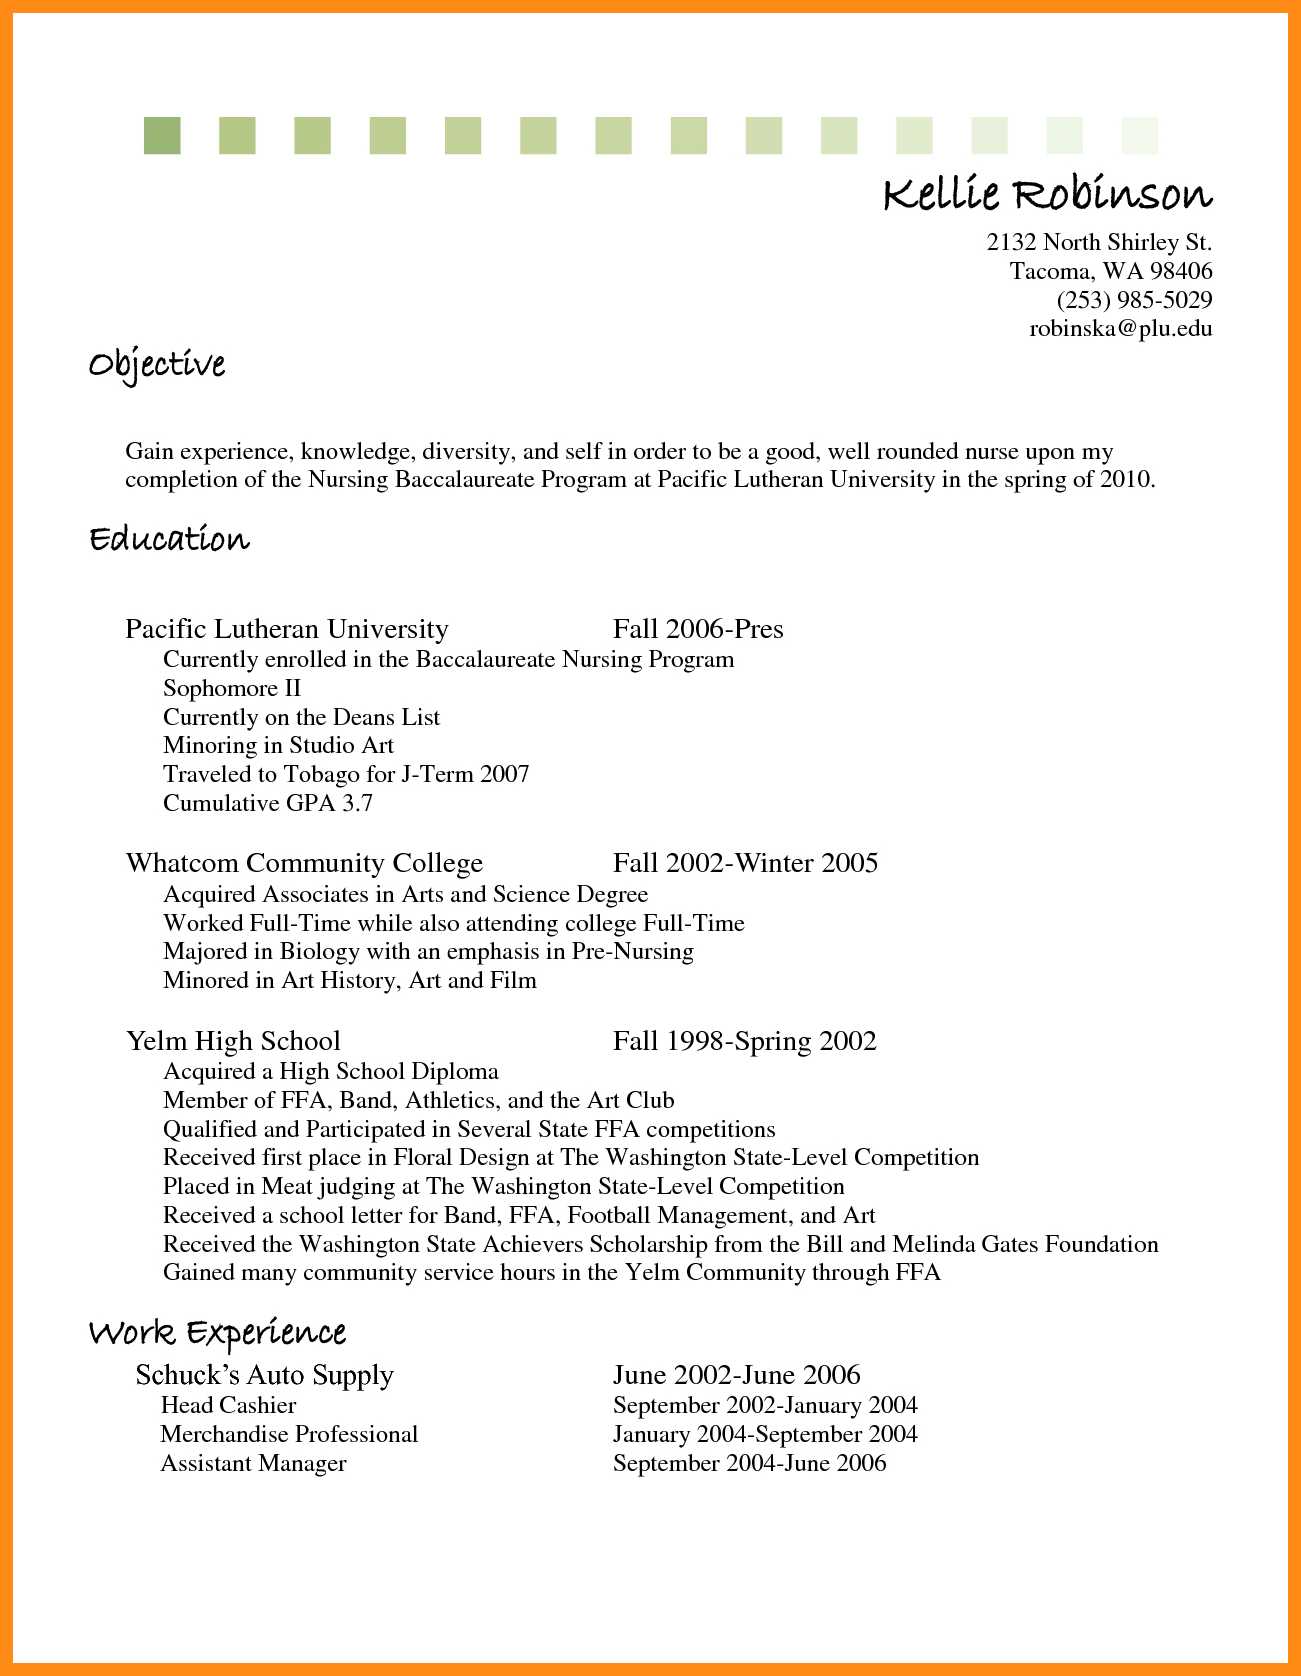 Objective On A Resume Biology Resume Objective Examples Retail Resume Template Image Job Objectives New Sales Associate objective on a resume|wikiresume.com